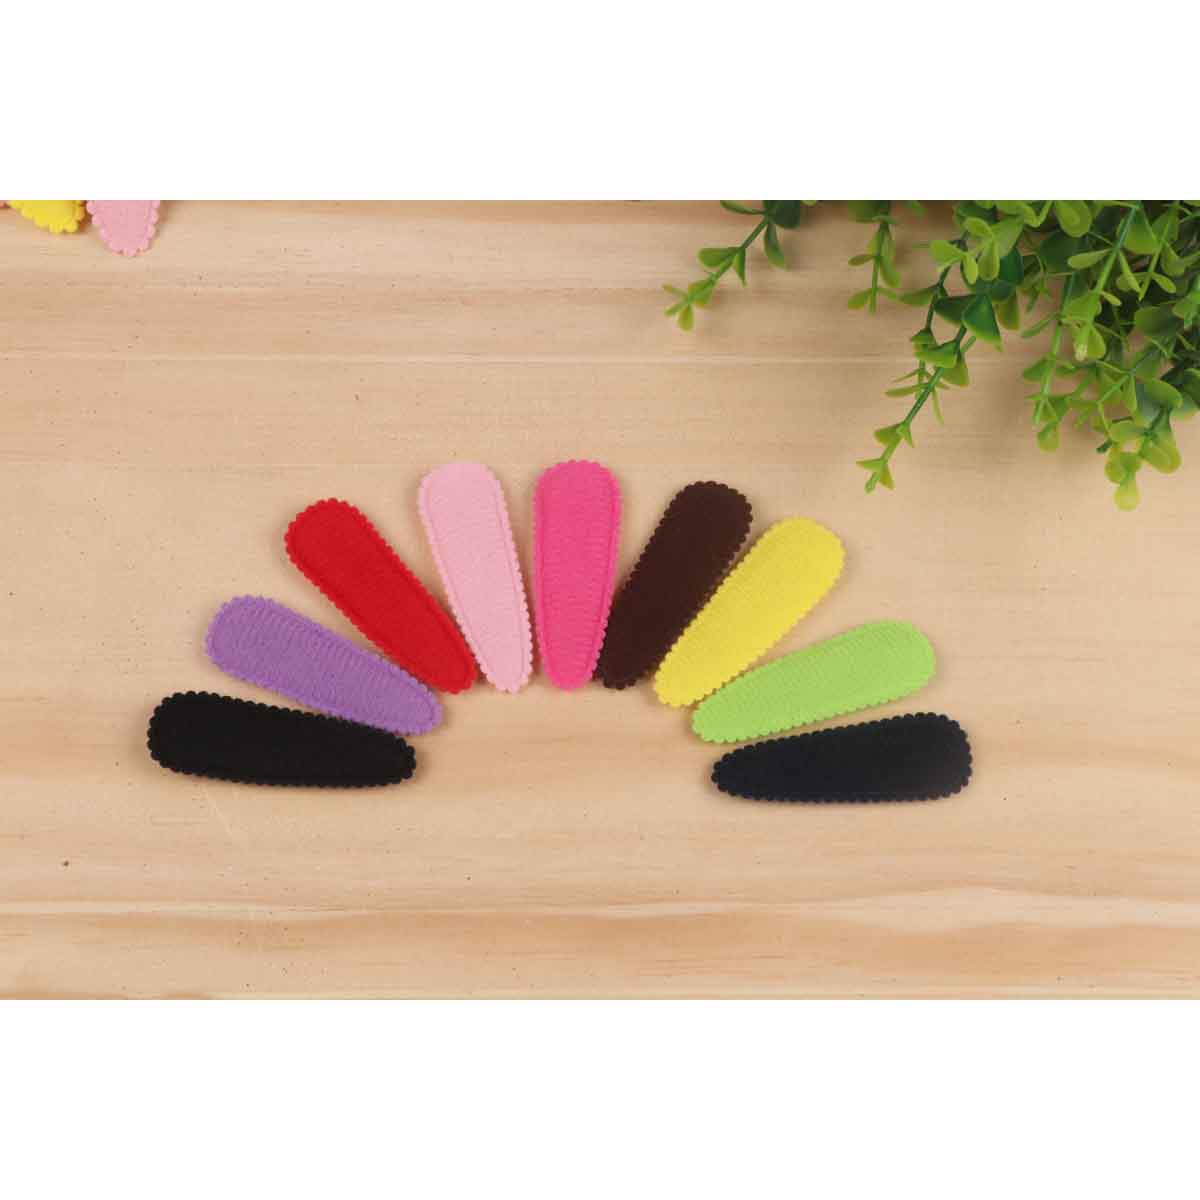 90 Padded Felt Hair Clip Covers 55mm-9 Colors